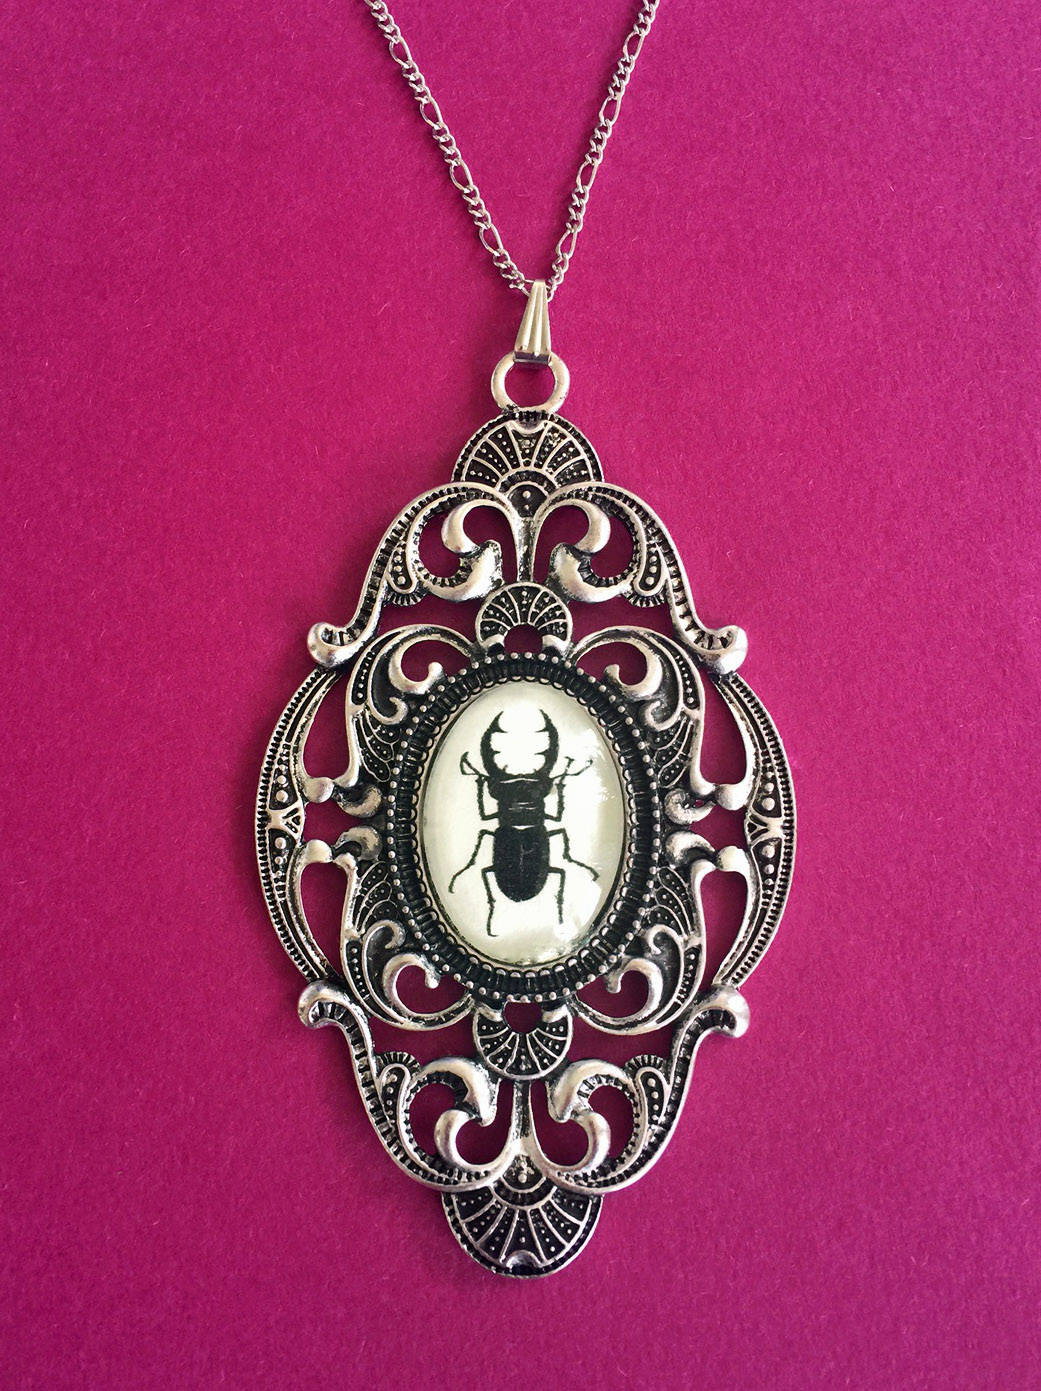 STAG BEETLE Necklace - Silhouette Jewelry, Insect Jewelry